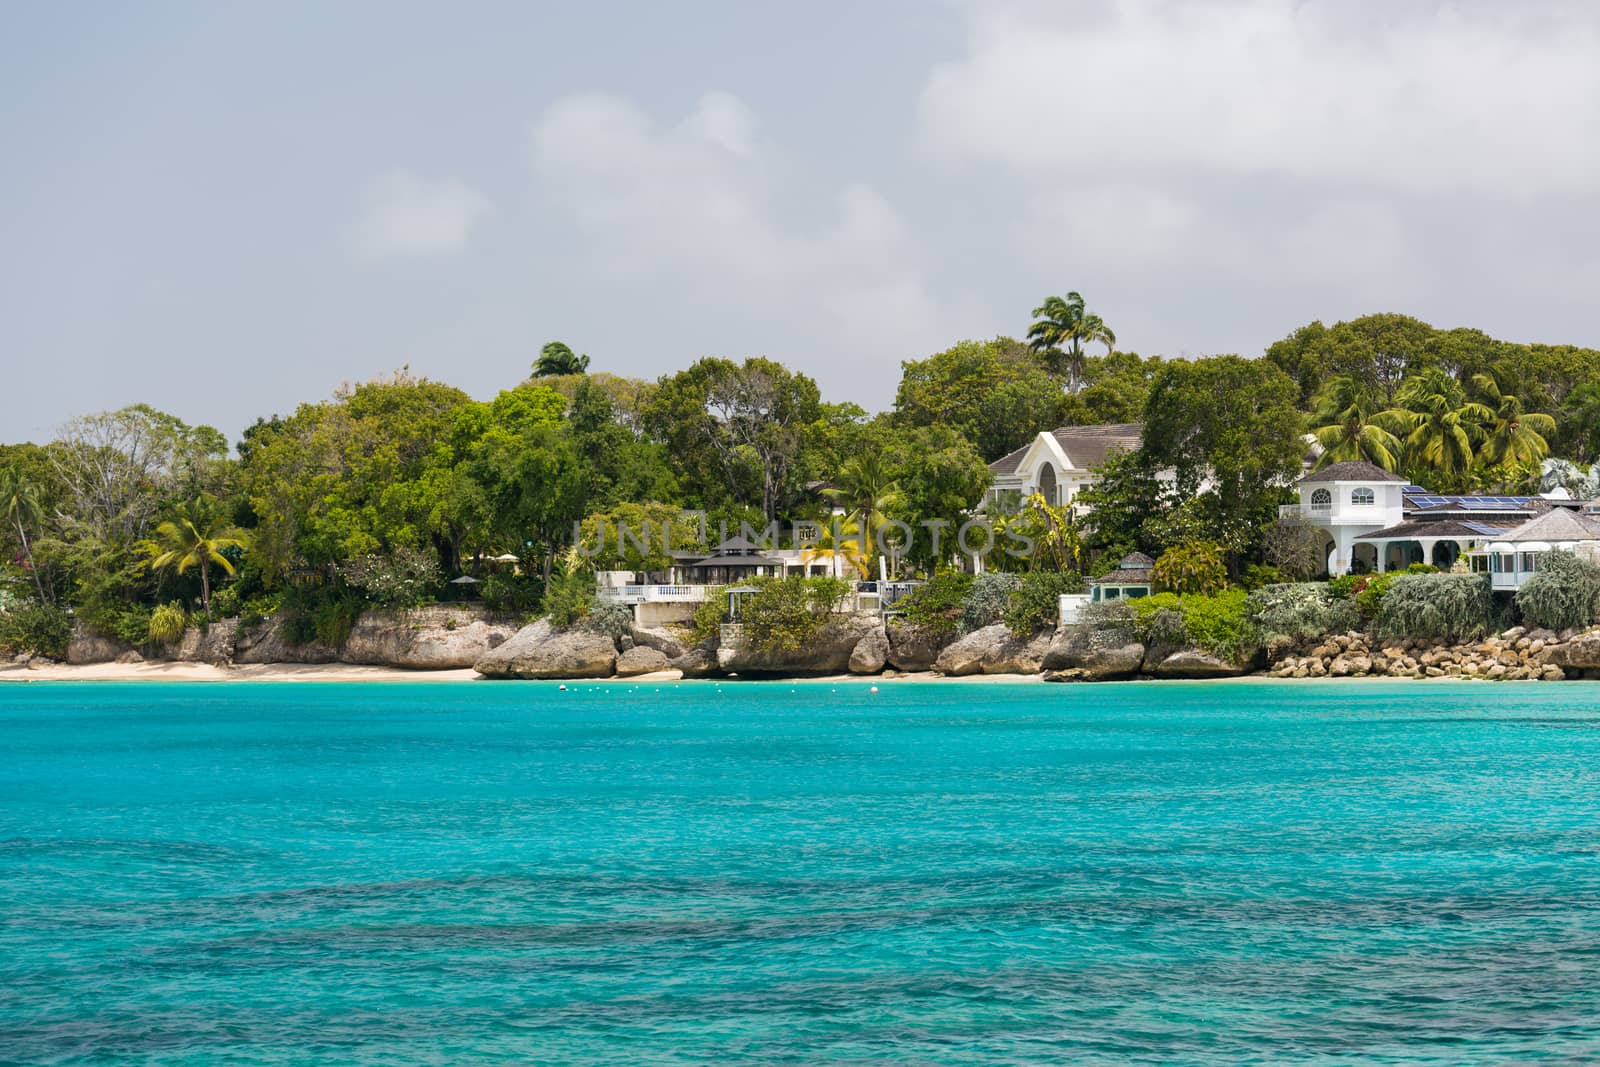 Residences as seen from a catamaran off the coastline of Barbados